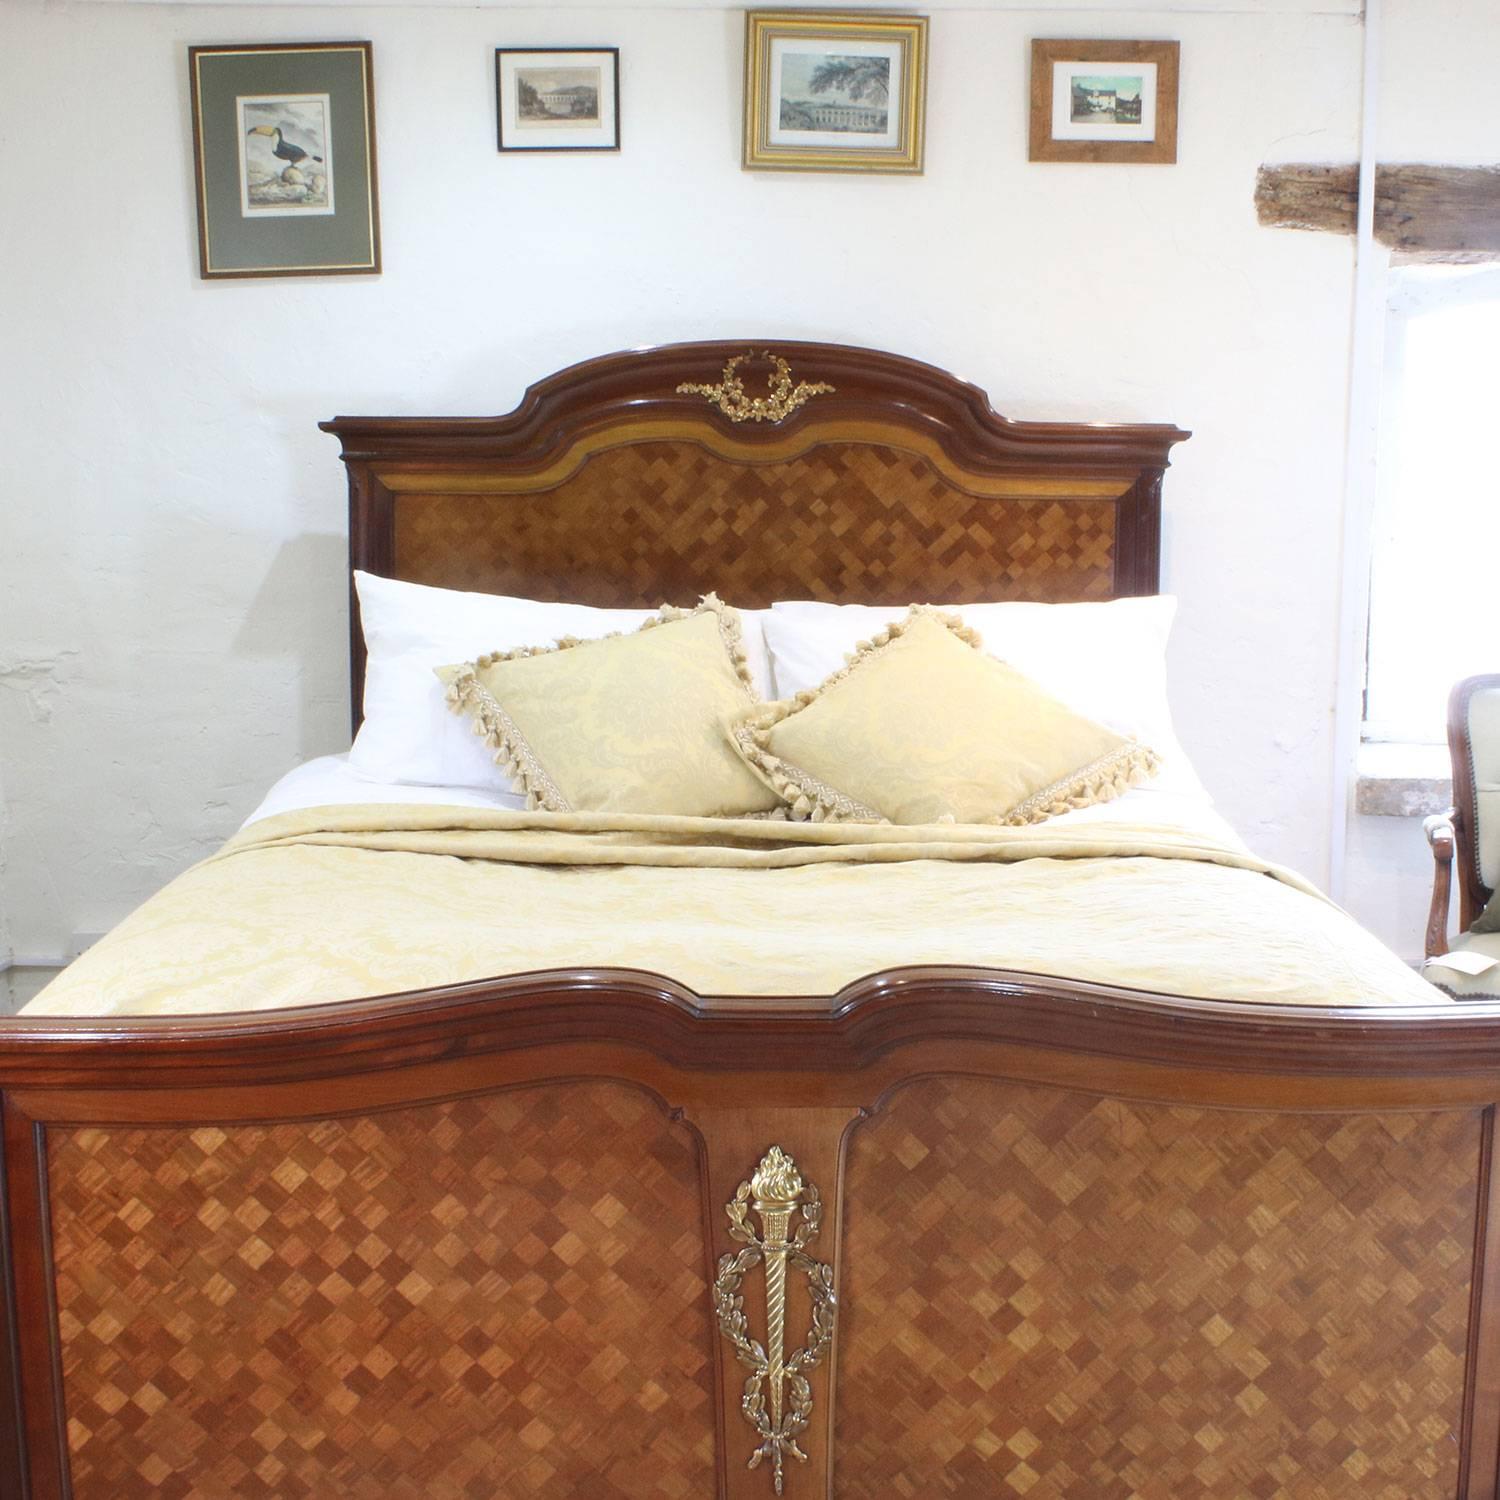 A fine parquetry Empire style bed in mahogany with fruitwood inlay and ormolu decoration.

This bed accepts a British king-size or American queen-size (60 inches, 5 feet or 150 cm) base and mattress set.

The price is for the bed frame alone.